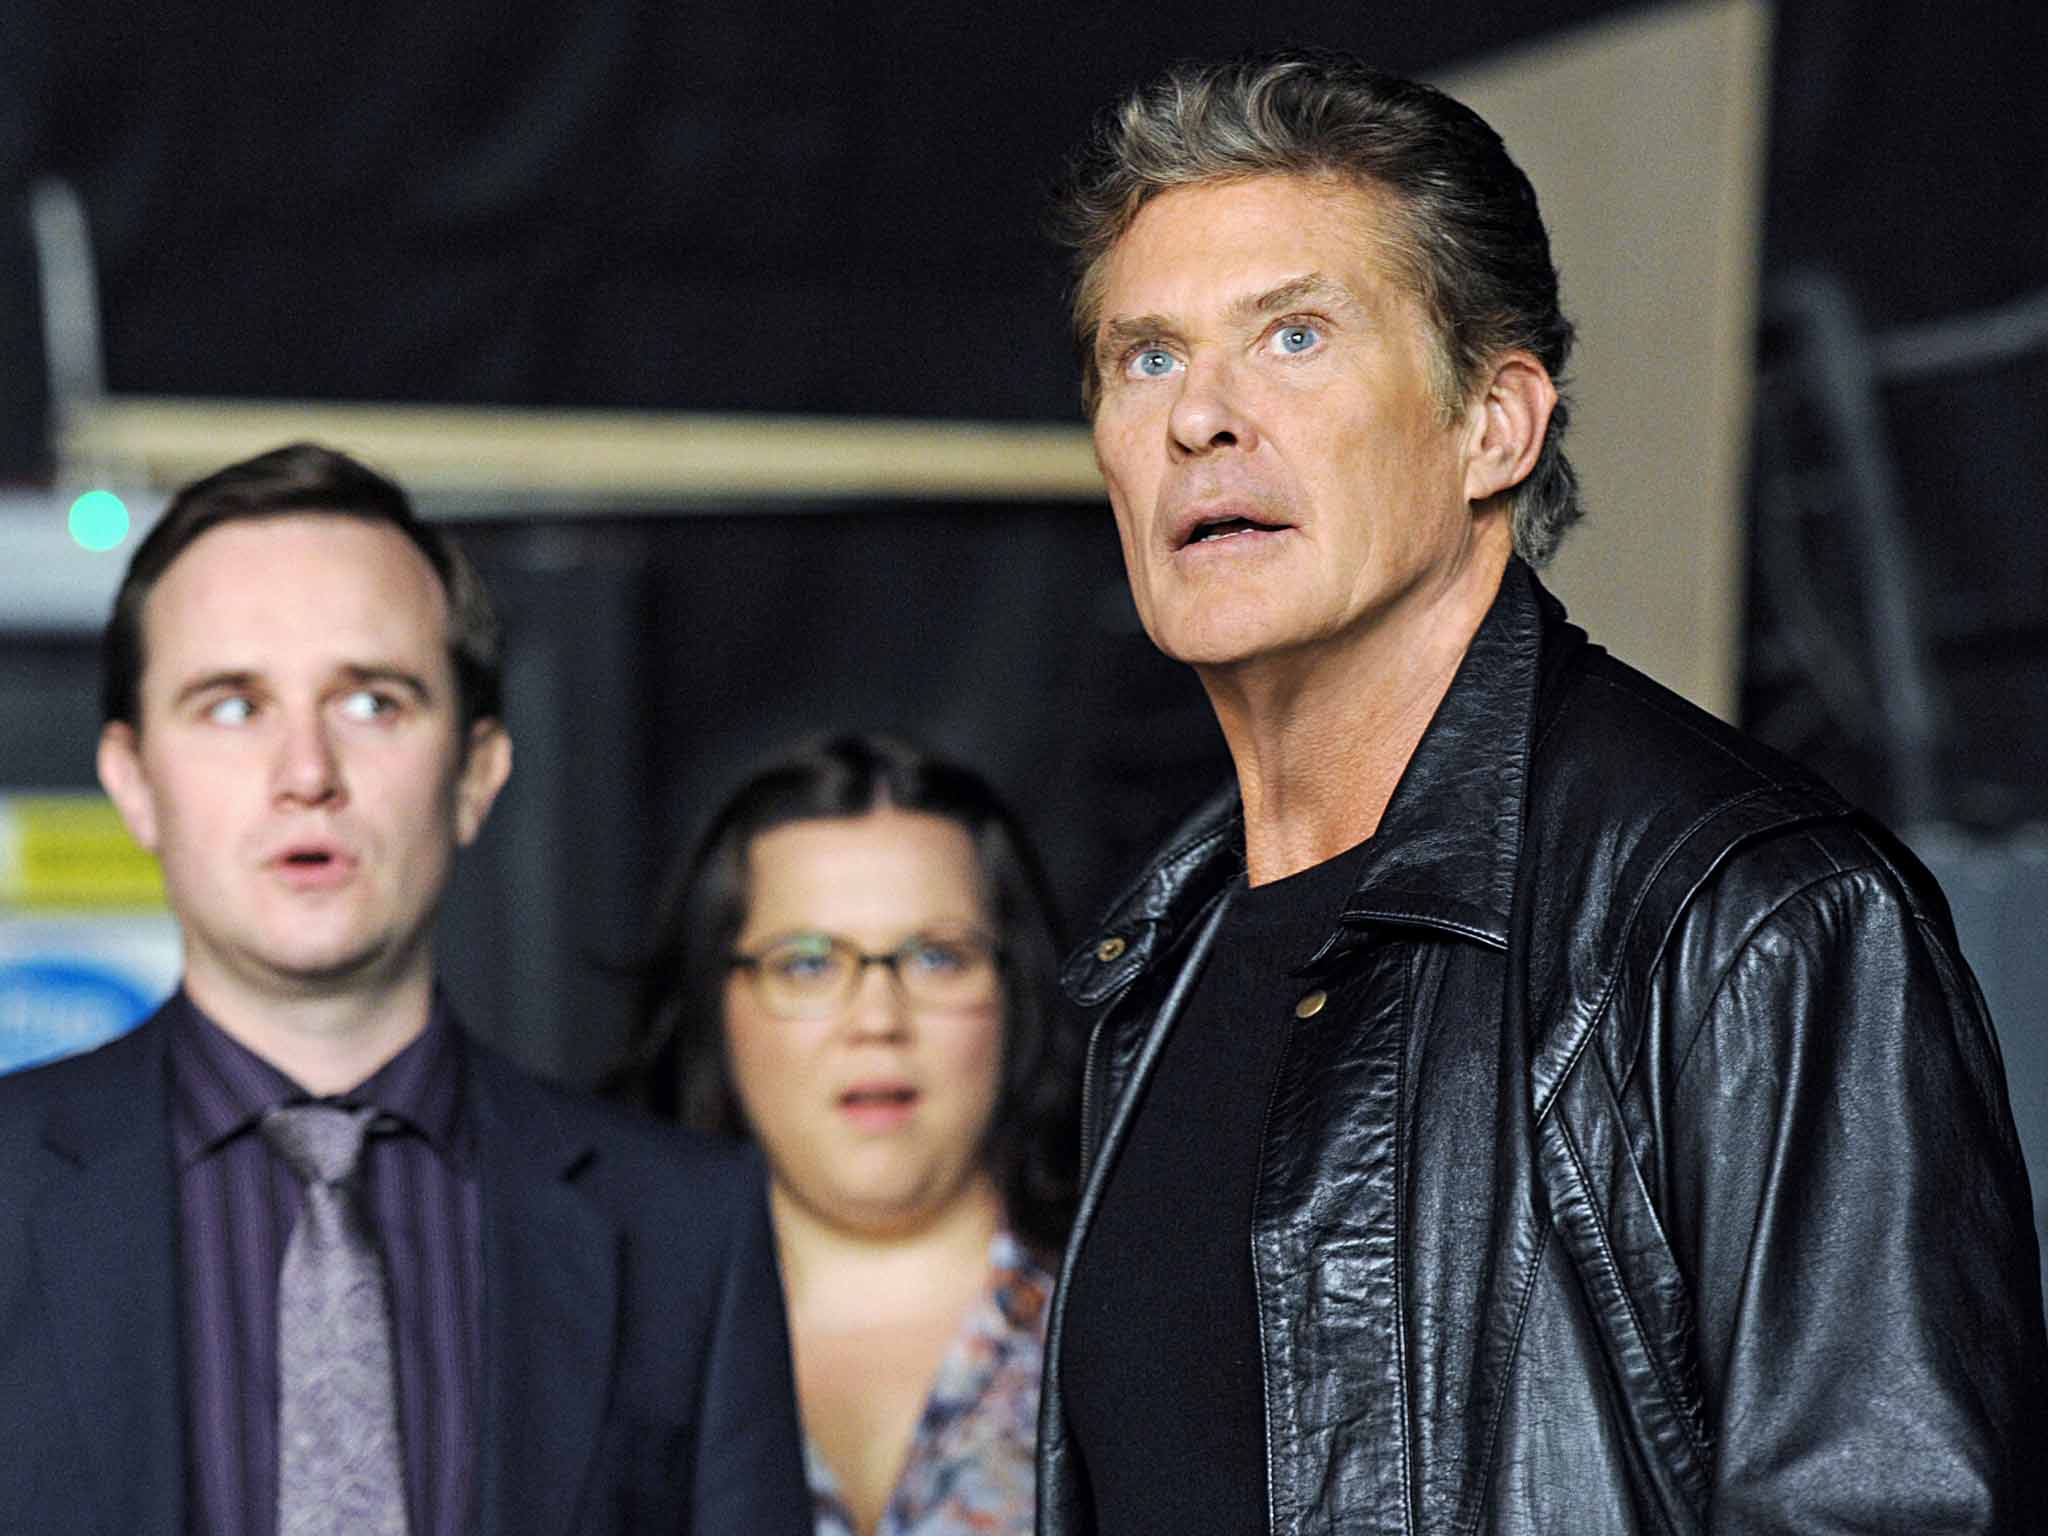 New beginnings: David Hasselhoff, with Fergus Craig and Ella Smith, stars in a new improvised comedy